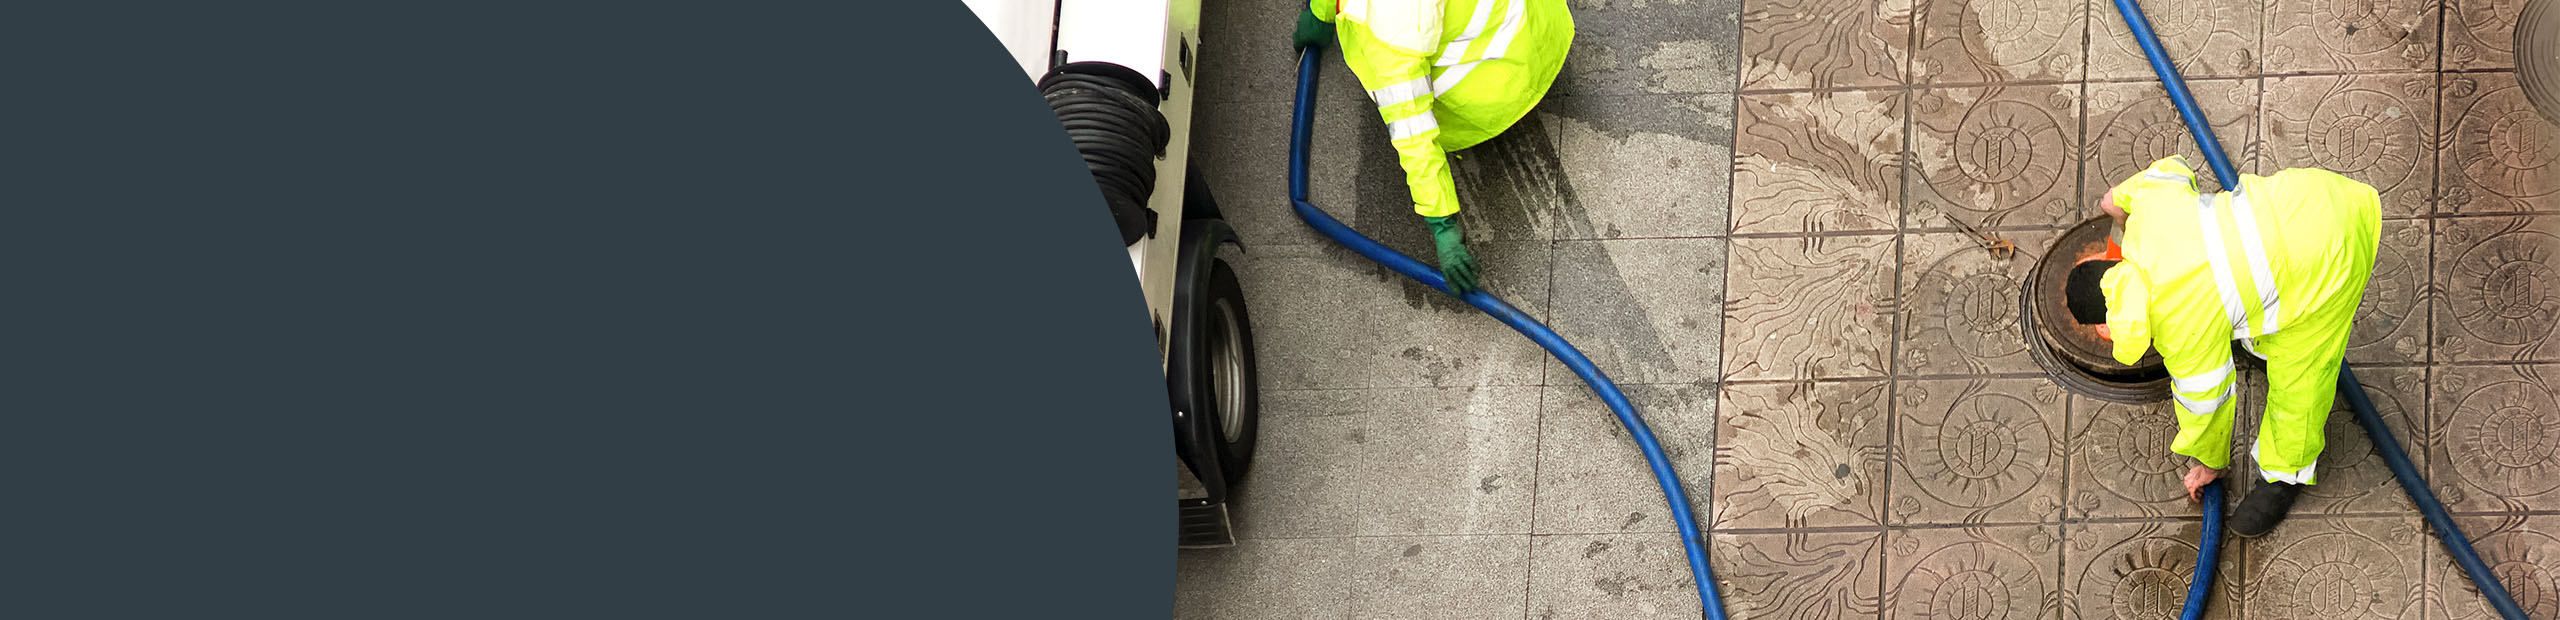 Drainage Services Newham